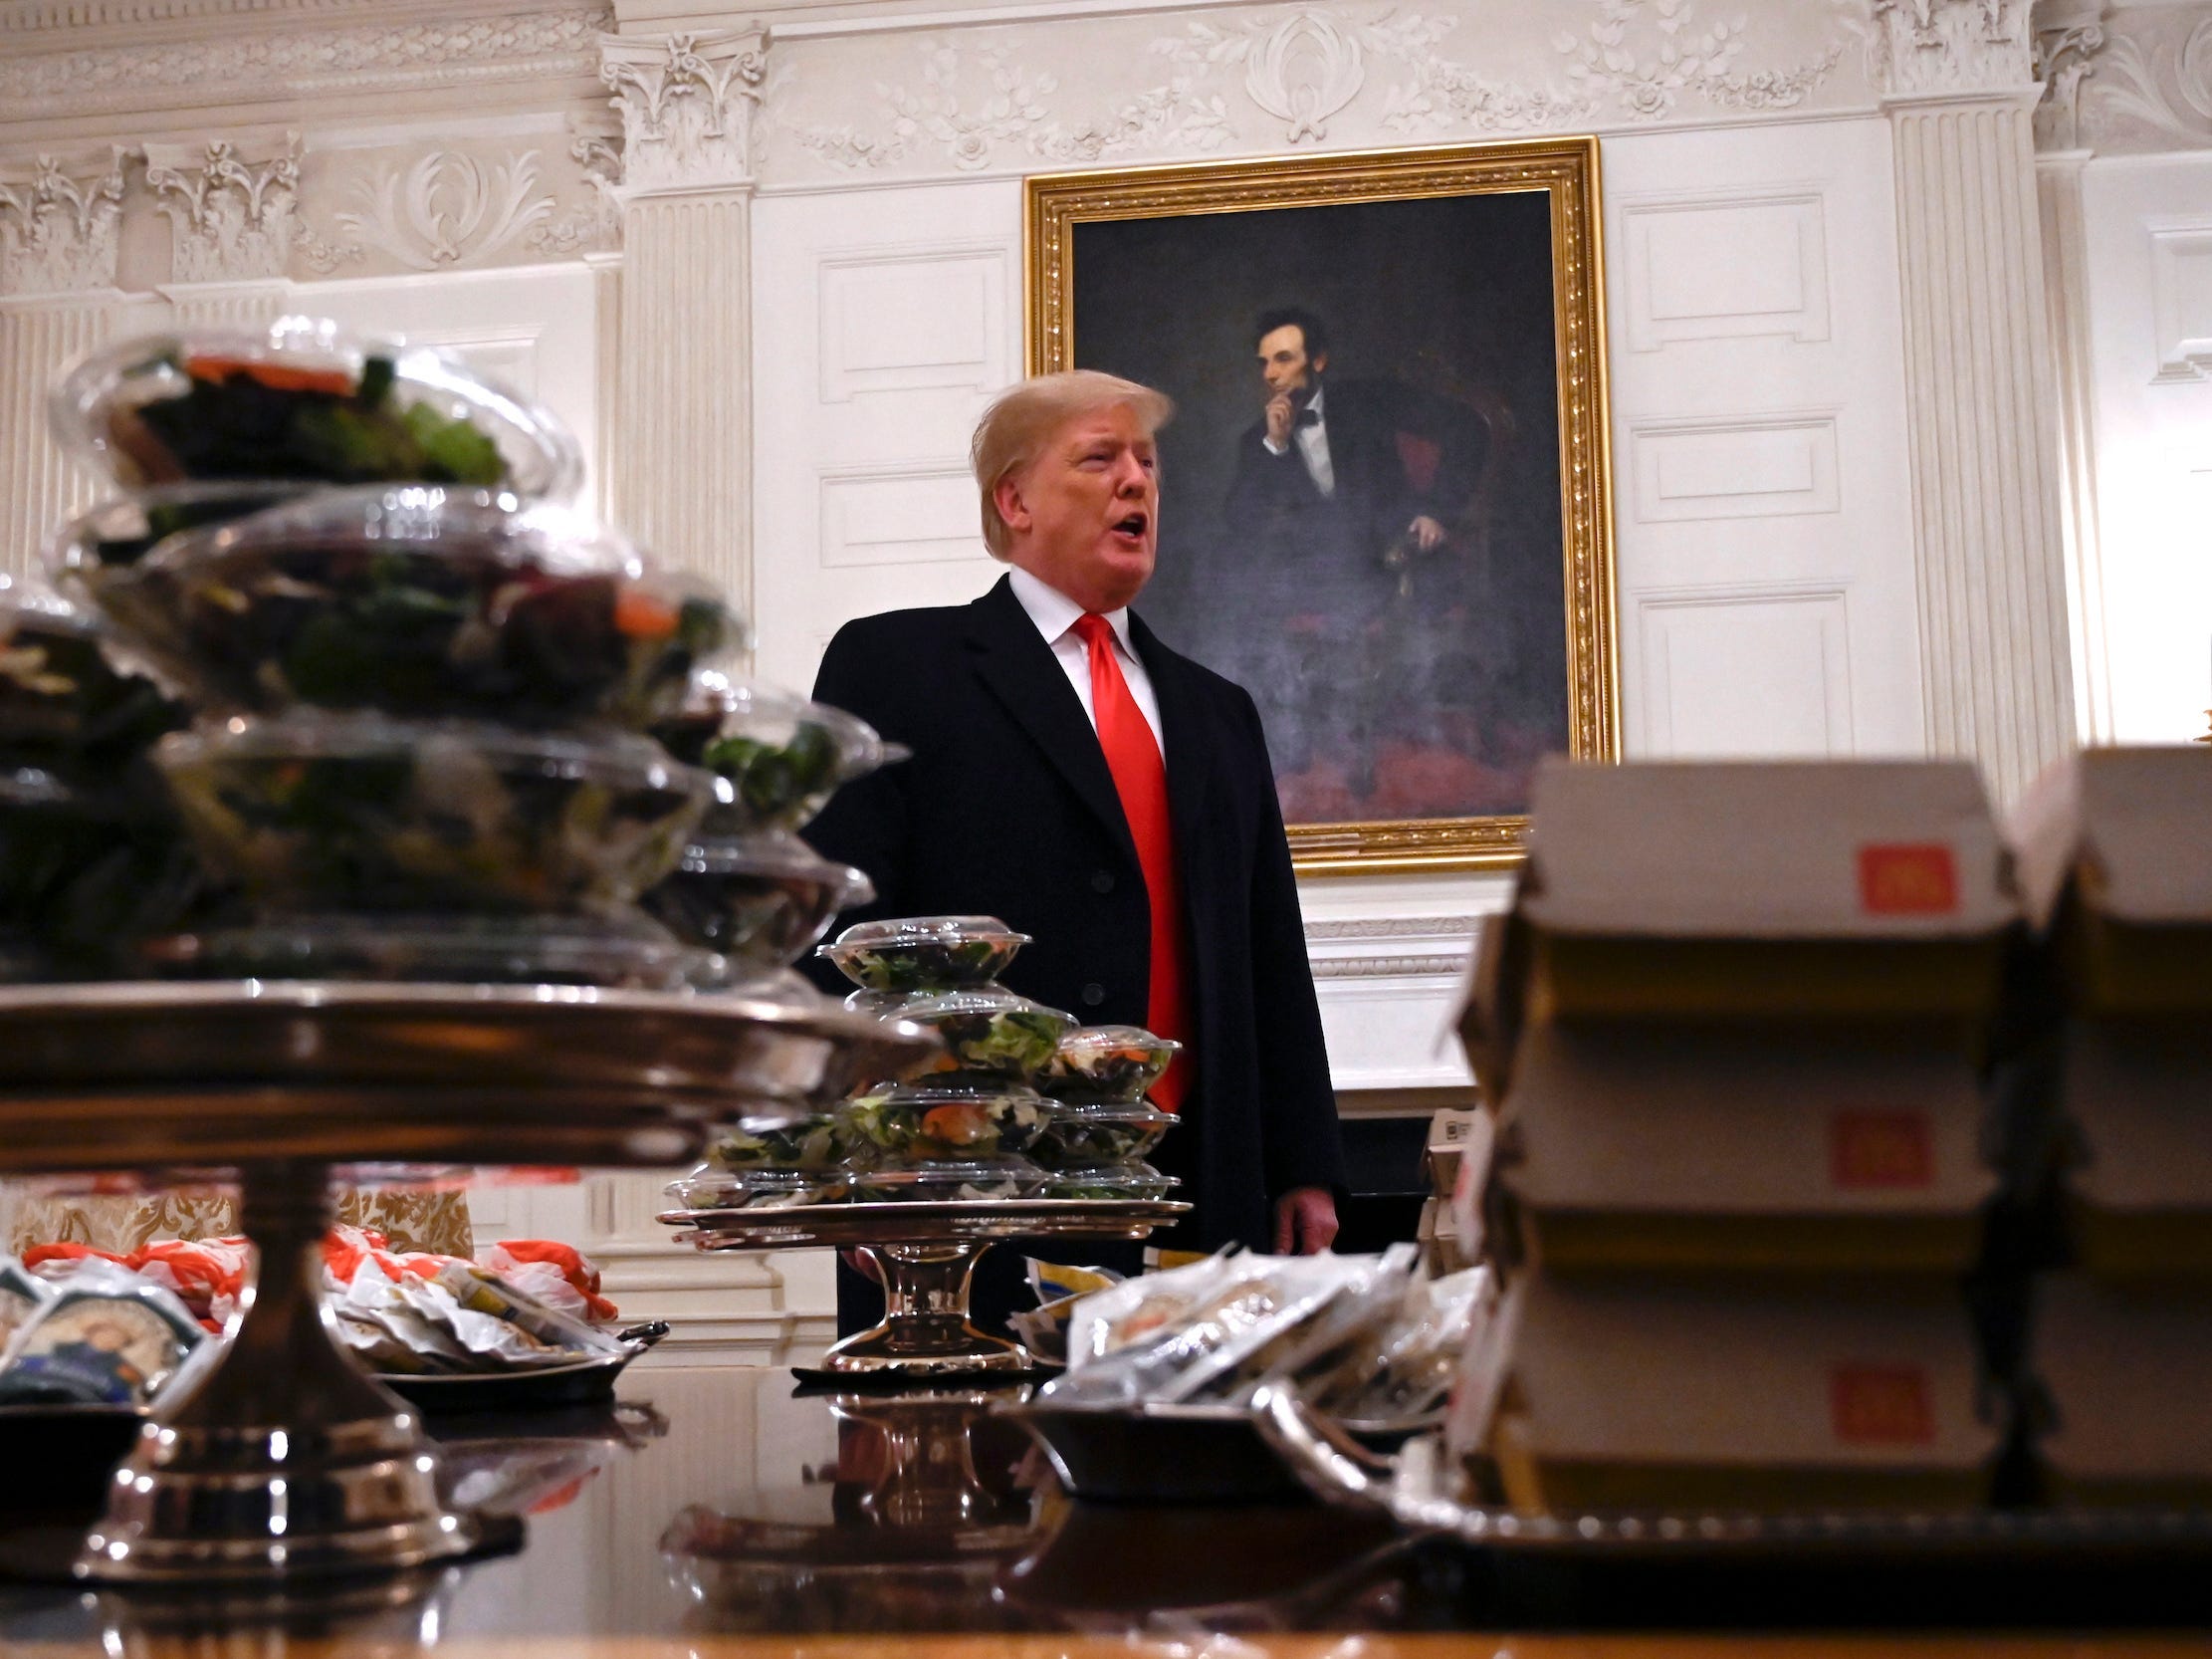 Former President Donald Trump talks to the press about the table full of fast food in the State Dining Room of the White House in Washington, Monday, Jan. 14, 2019, during a reception for the 2018 college football playoff National Champion Clemson Tigers.